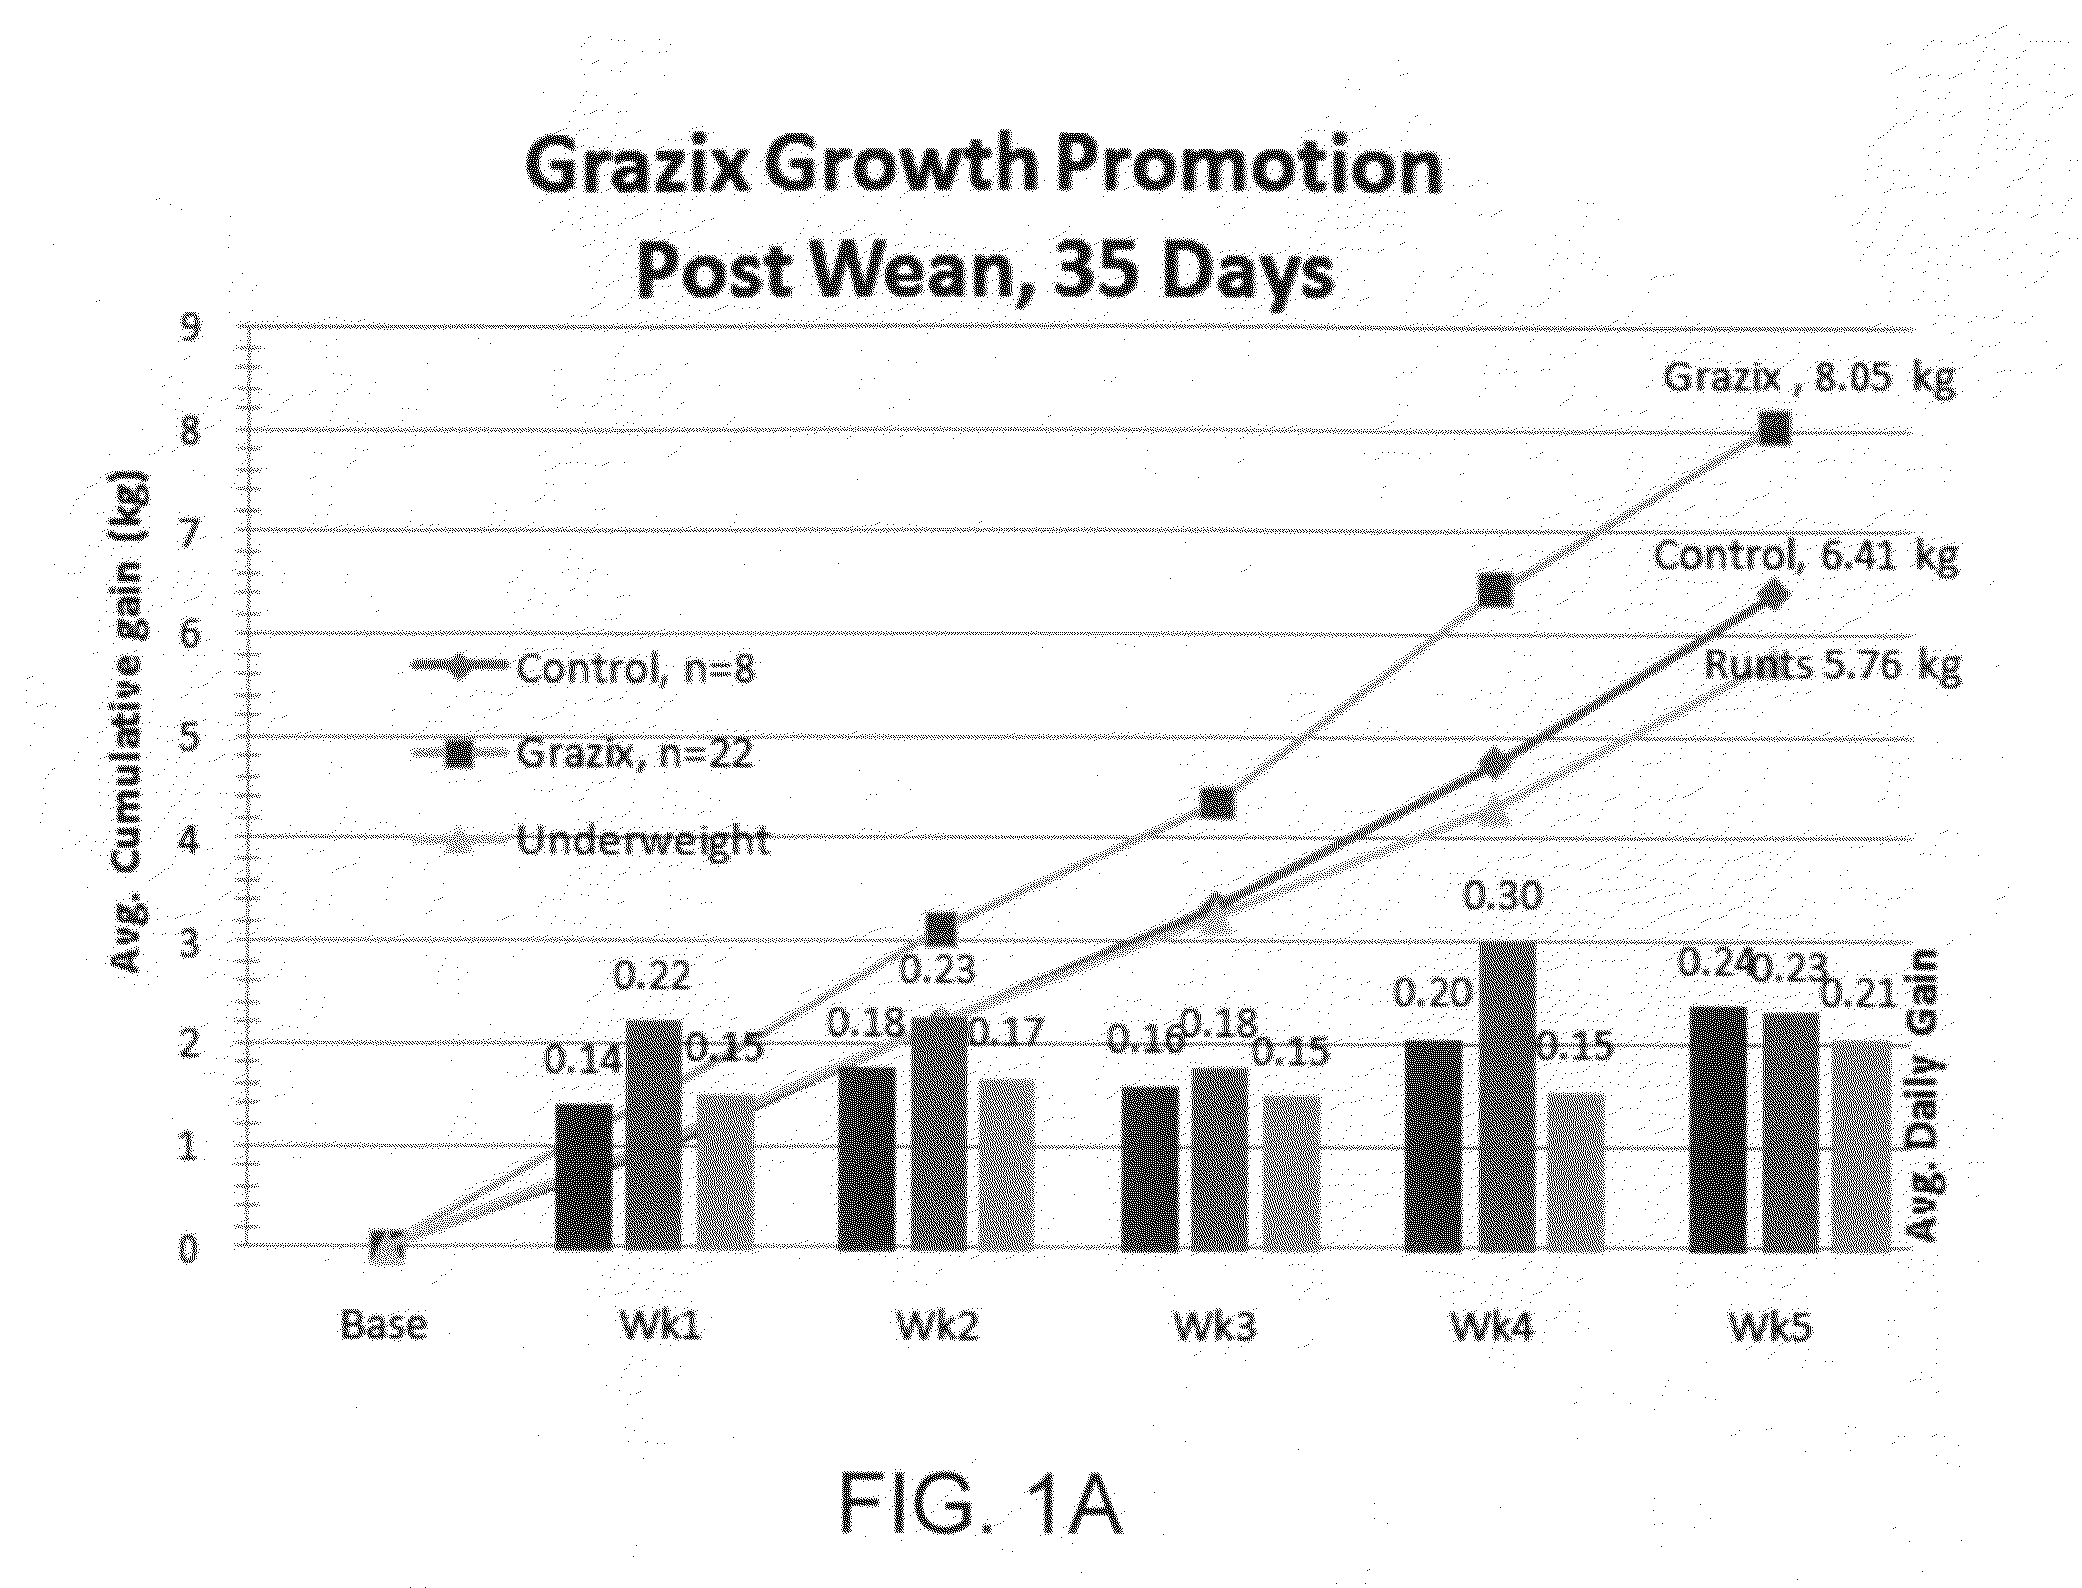 Method of treating damaged mucosal or gastrointestinal tissue by administering a composition comprising a mixture of pomegranate and green tea extracts and releasably bound hydrogen peroxide